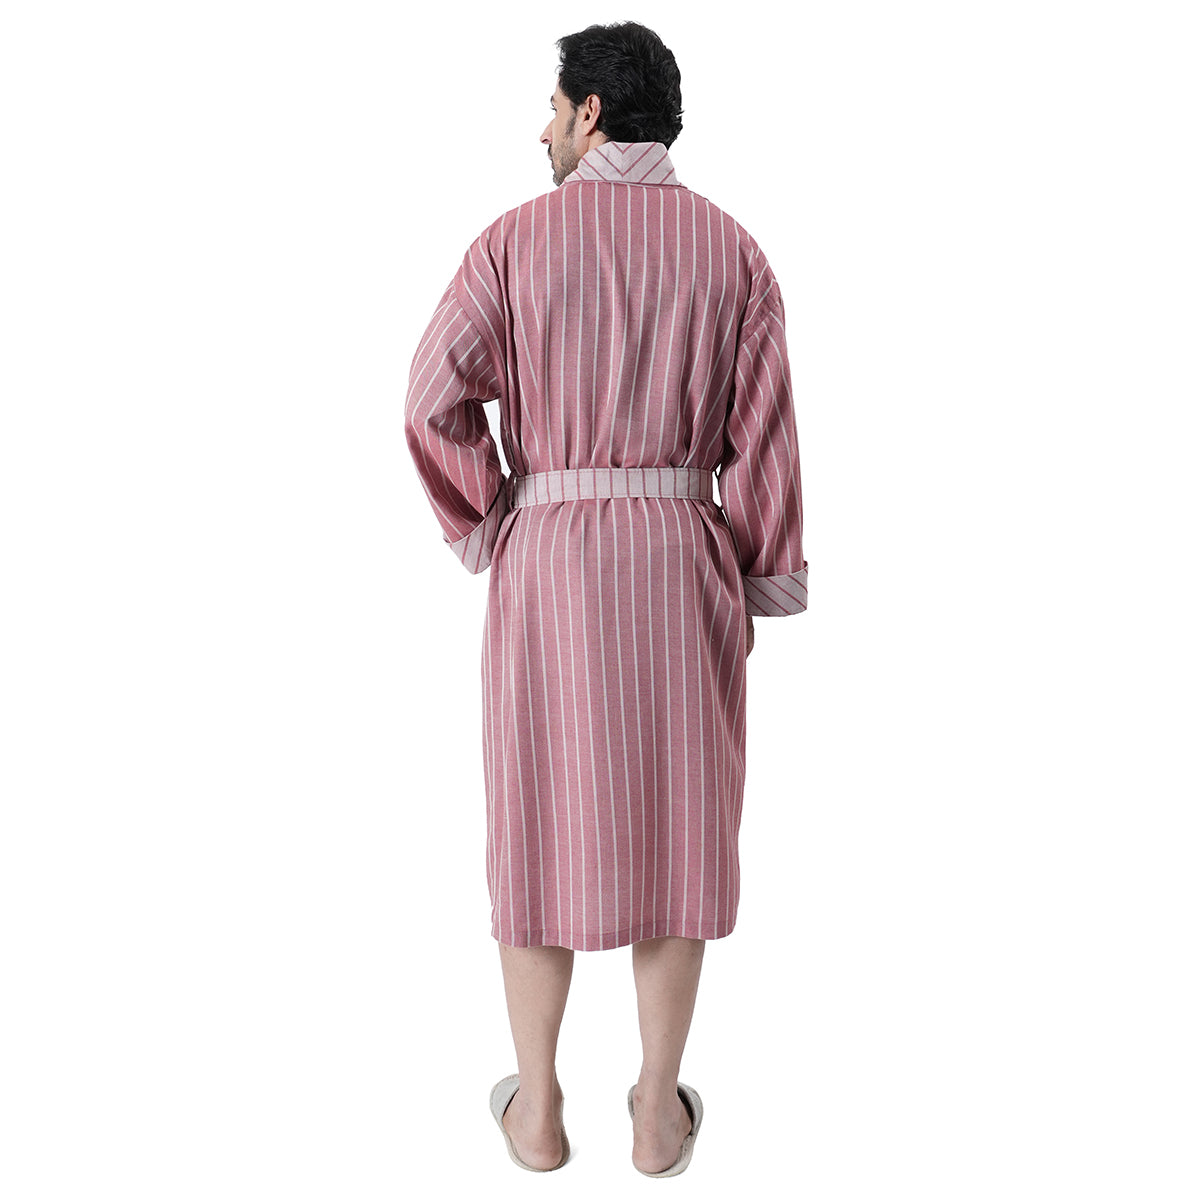 Luxe Boutique Adore Stripe Cashmere Soft Red 1Pc Calf Length Robe/Gown/Bath Robe In Box Packaging